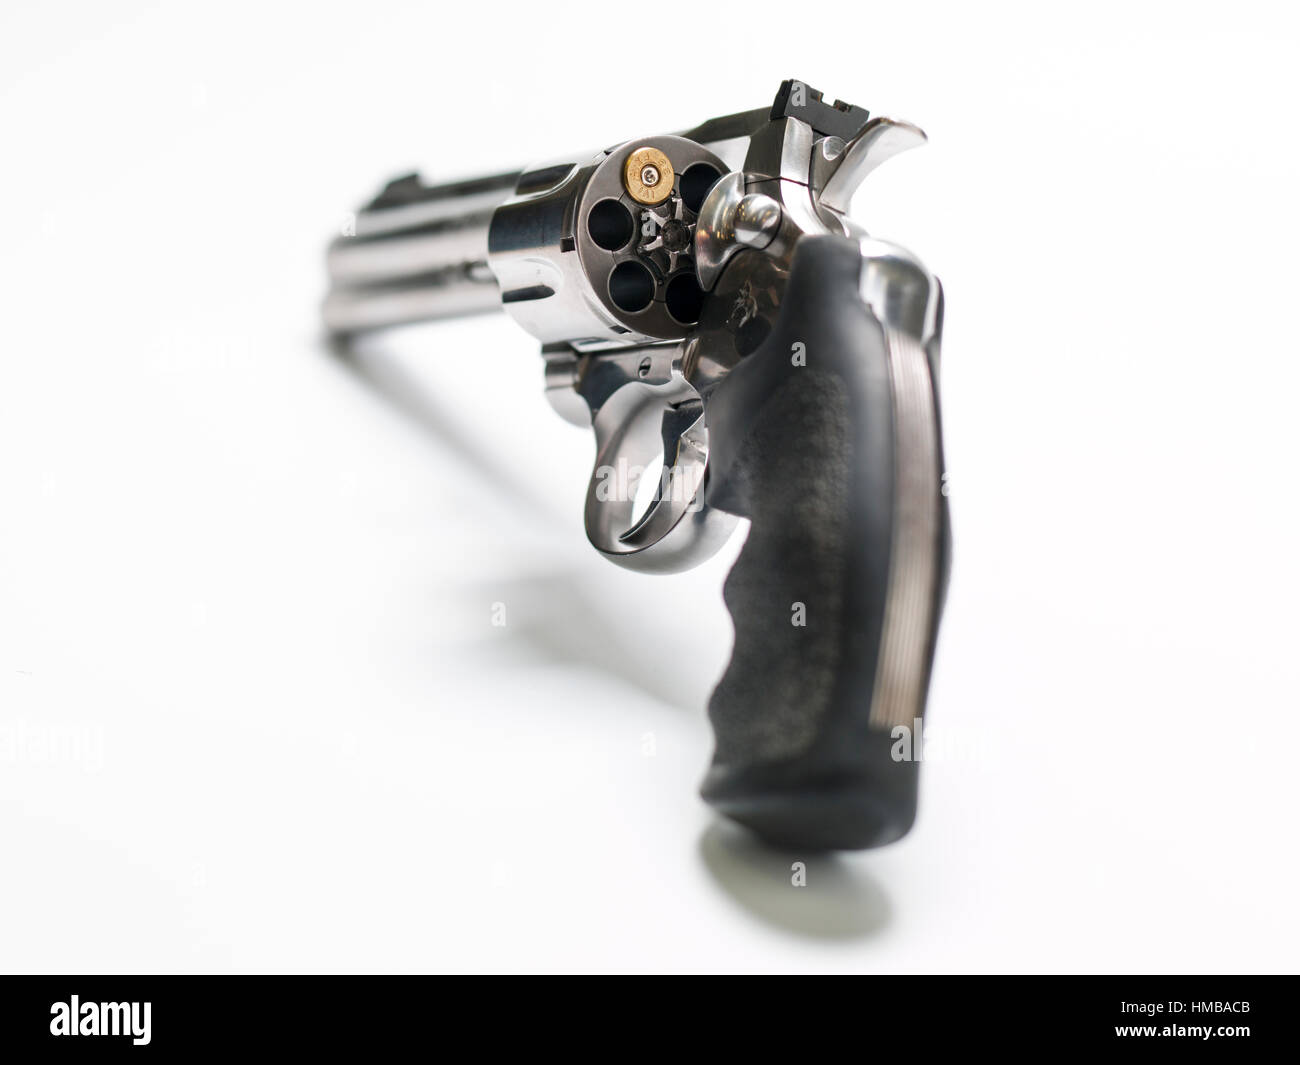 Russian roulette stock image. Image of cartridge, revolver - 25153163